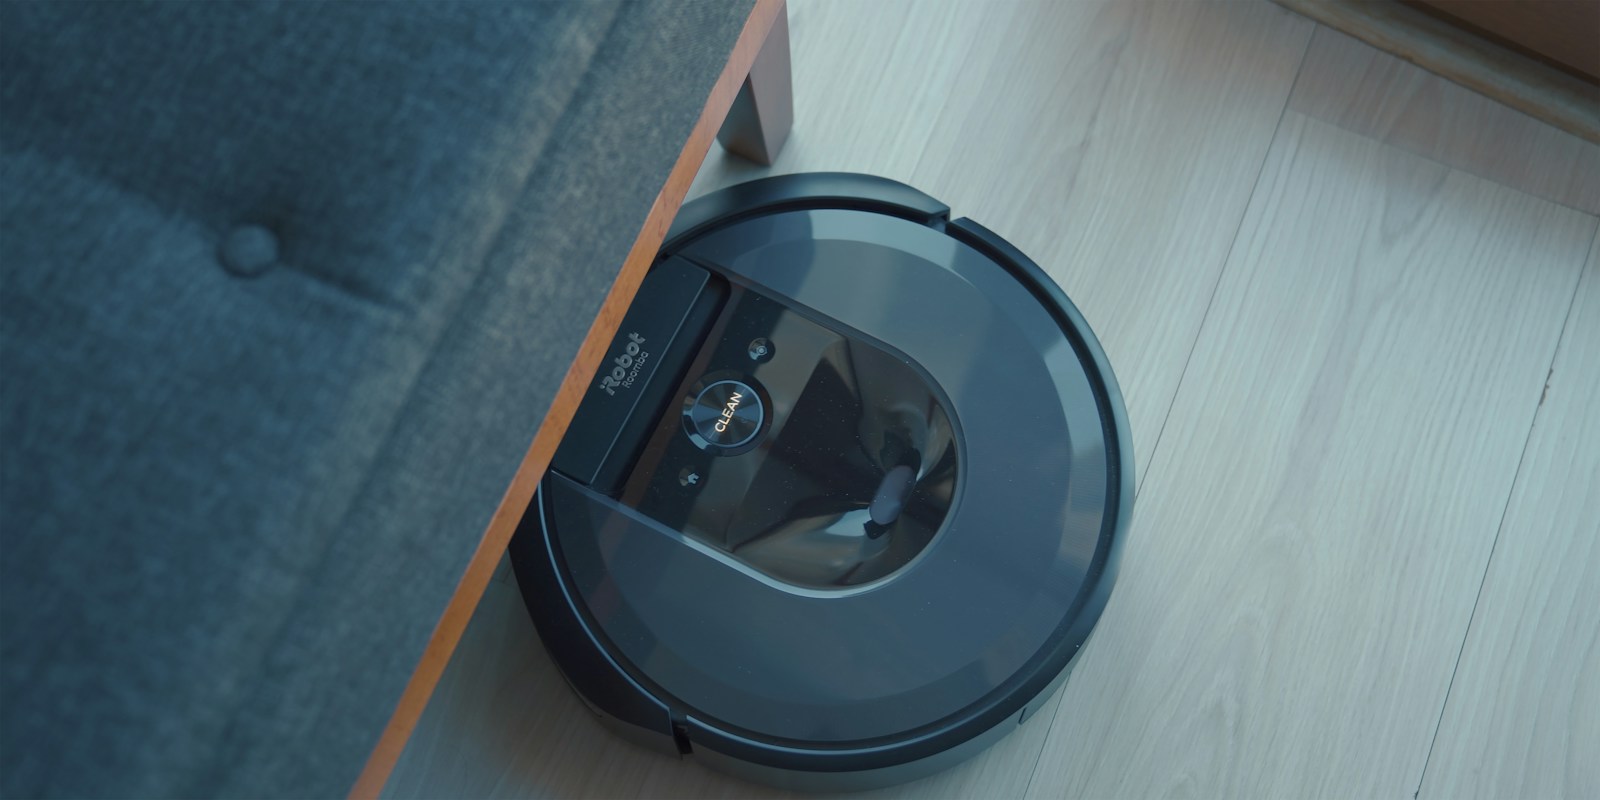 an irobot robotic vacuum is on the floor next to a couch